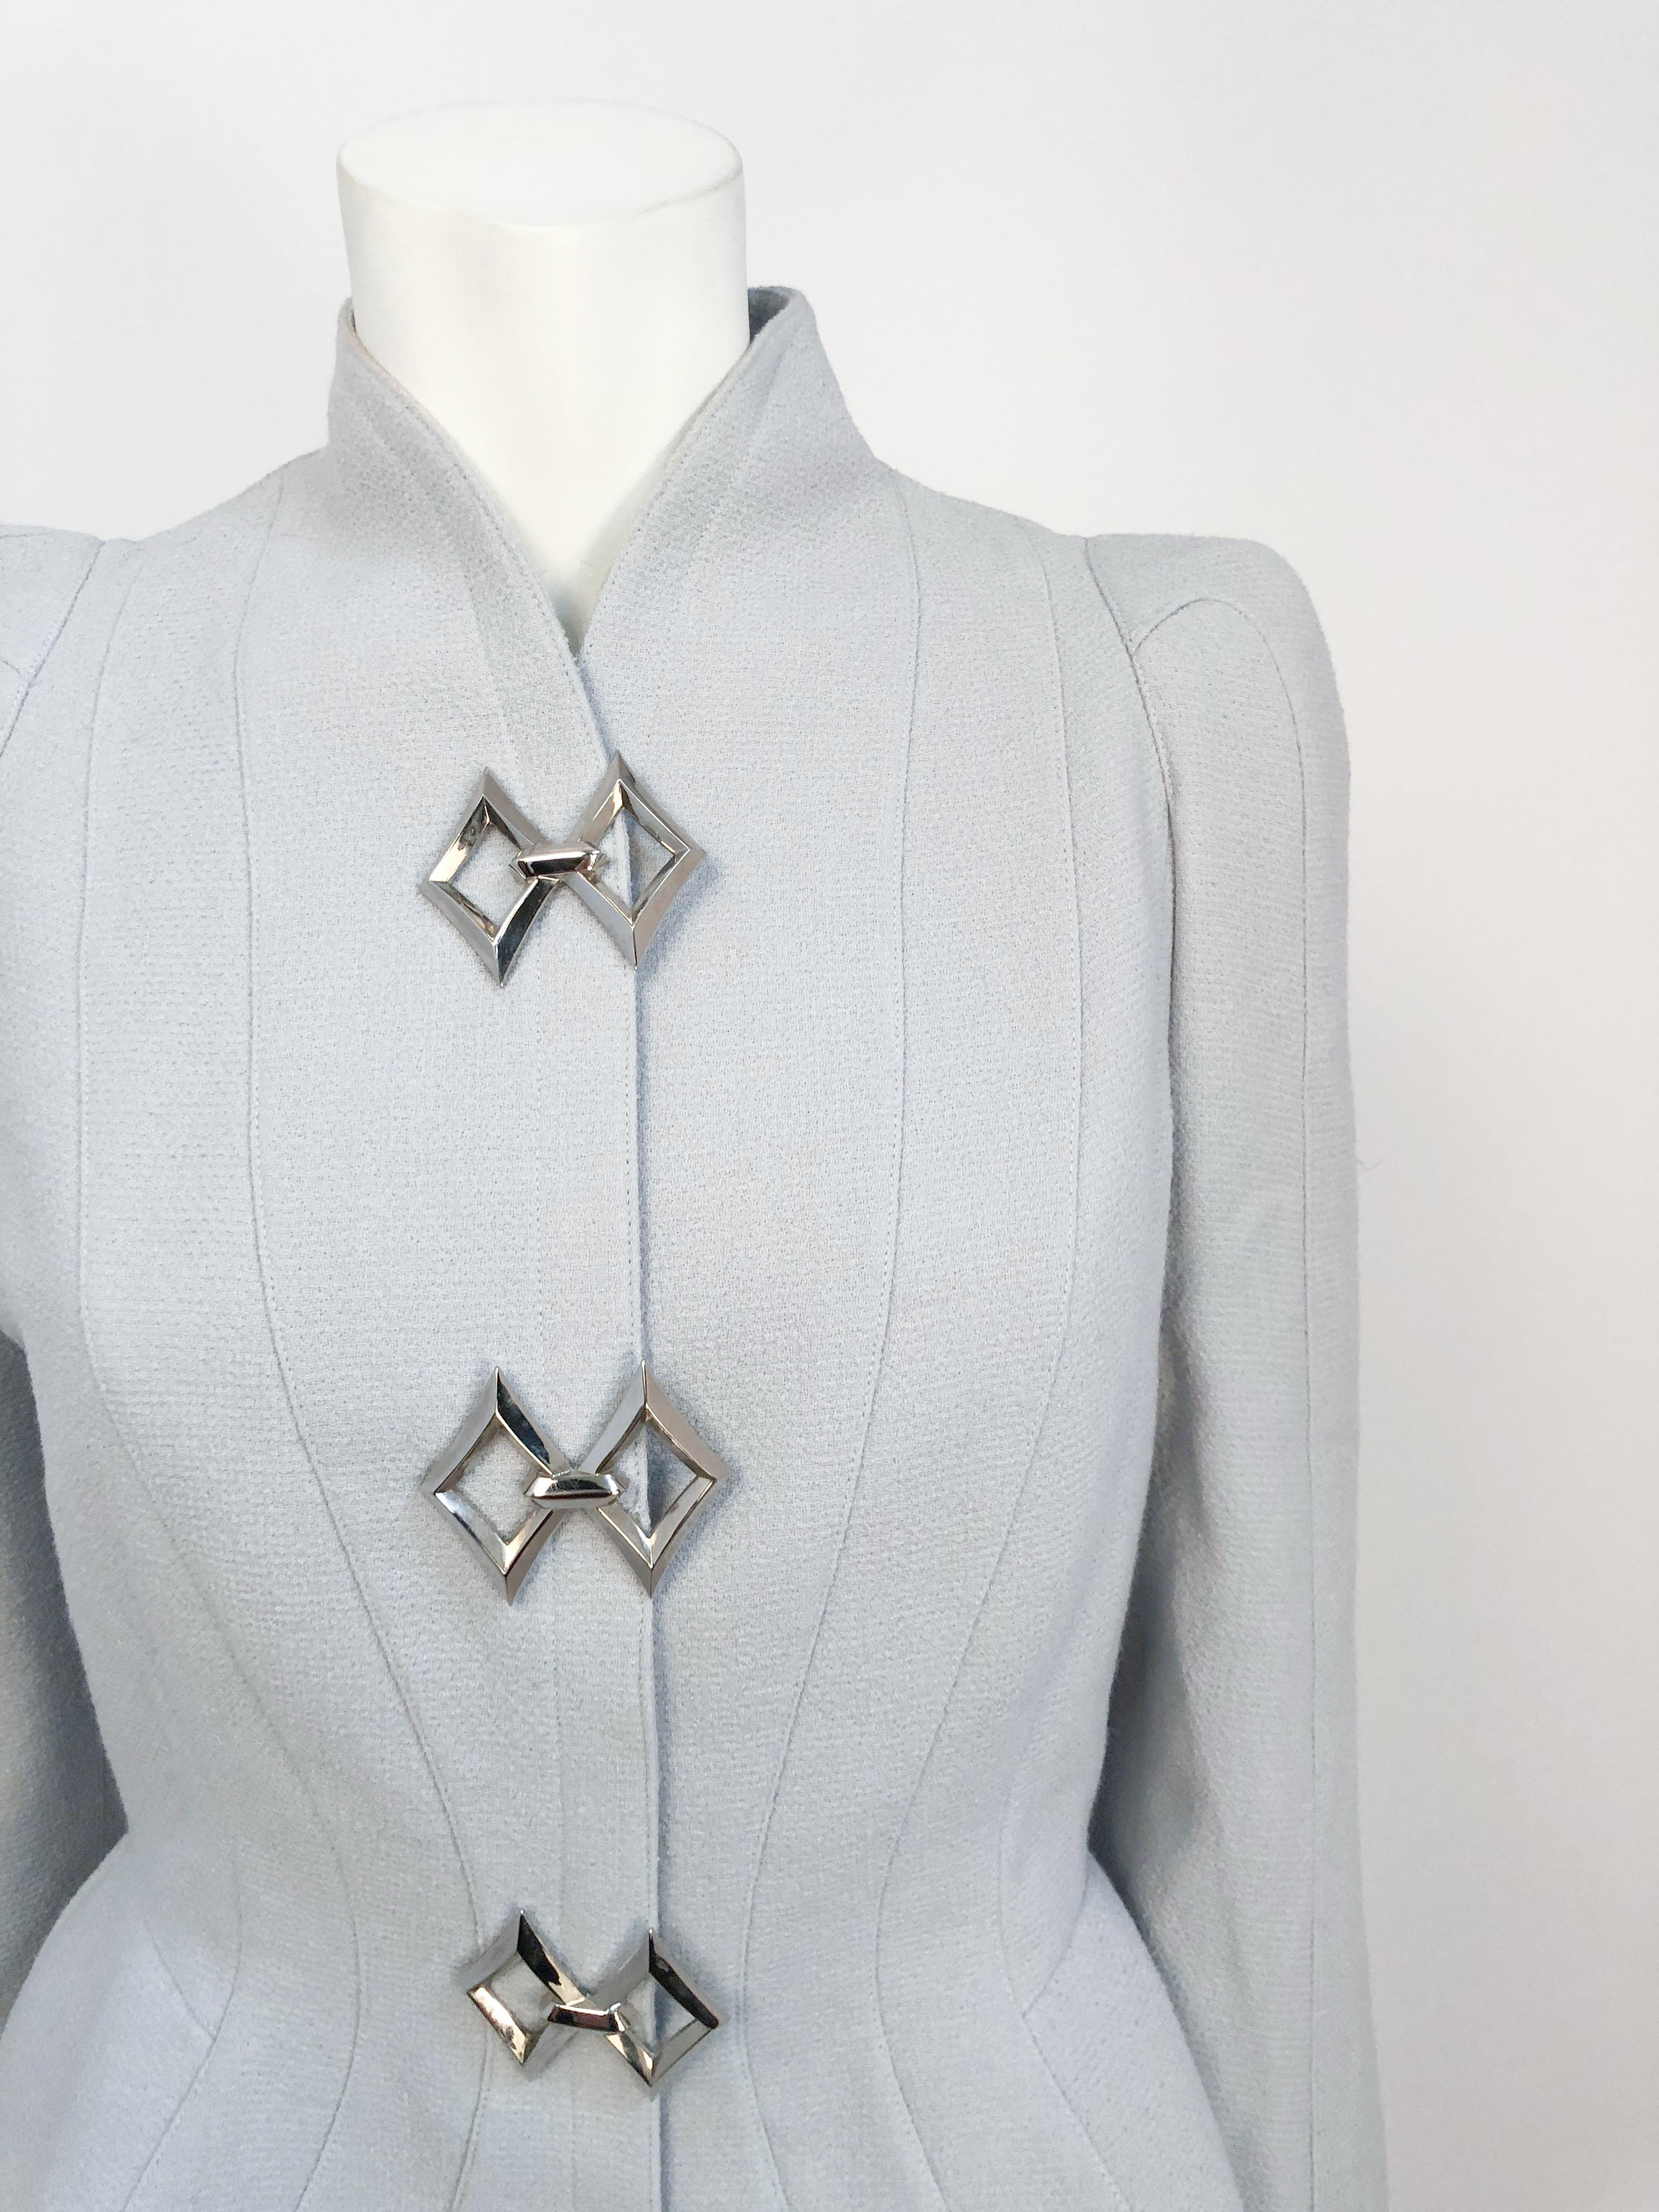 1980s Theirry Mugler Grey Paneled Jacket with Silver-toned Adornments. Also features oversized cuffs, ribbed paneling, and a modest flare at the hip